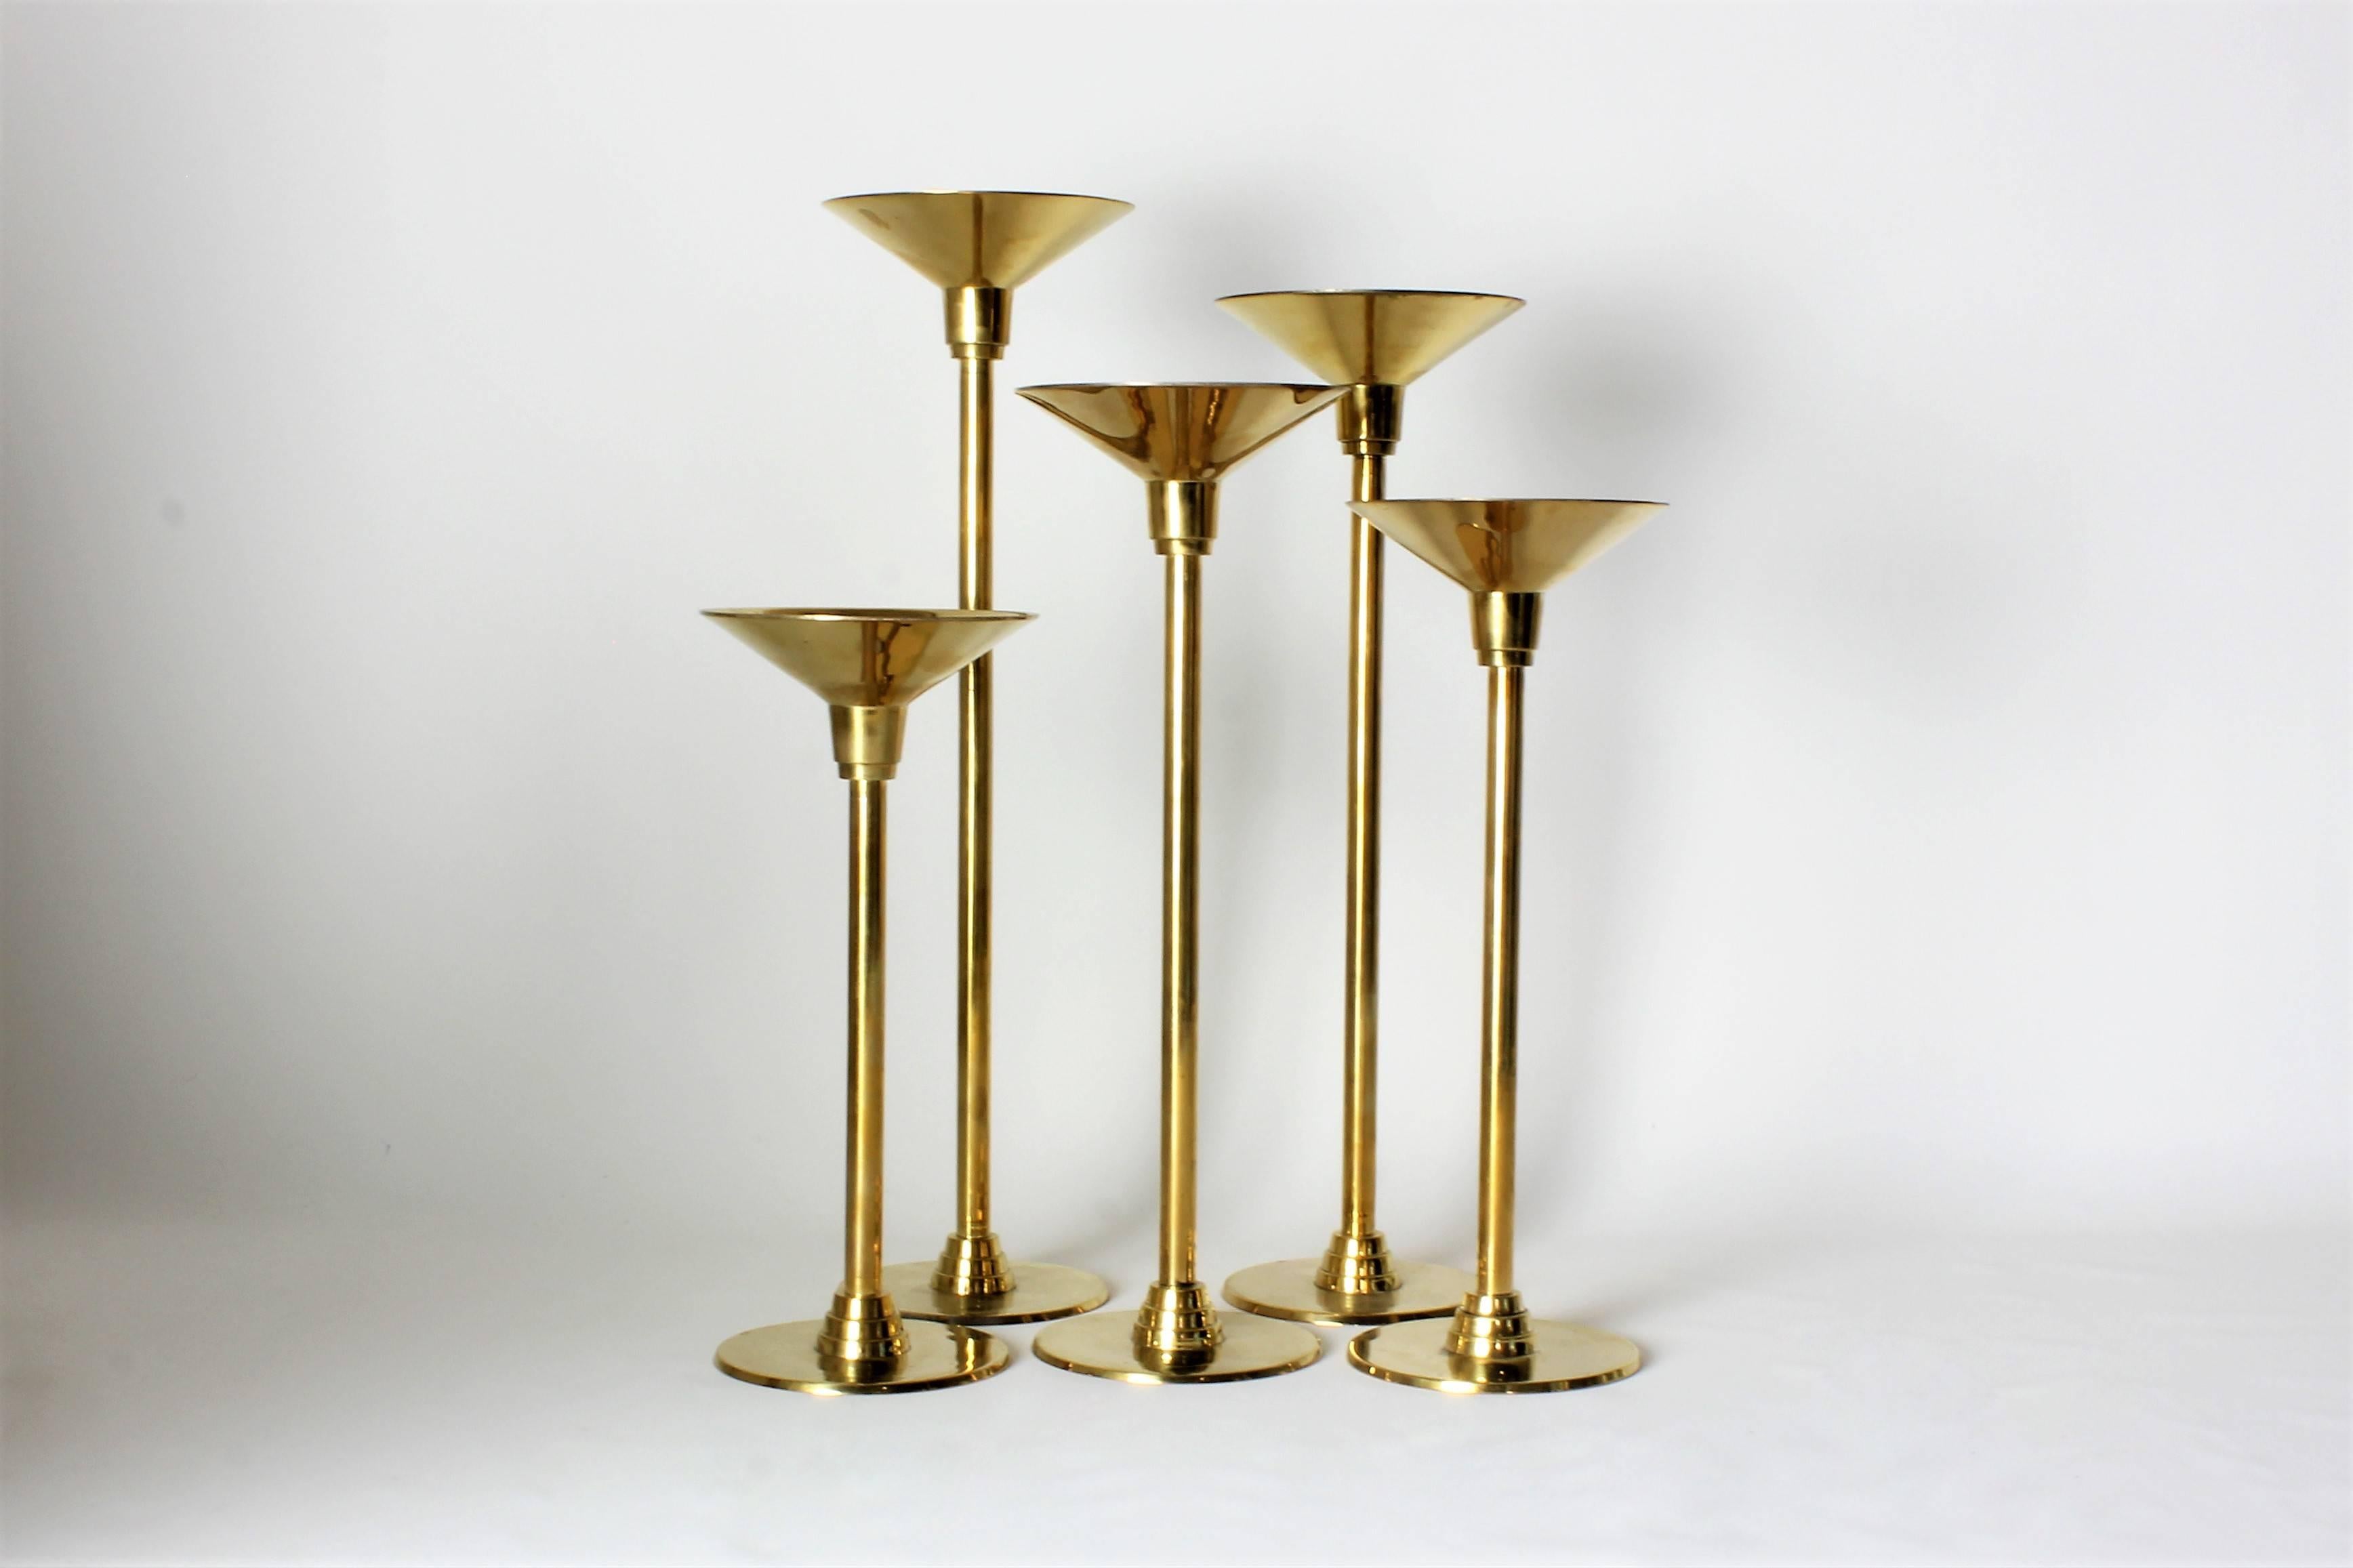 1970s Art Deco Revival brass candleholders with in graduated heights ranging from 10" tall to 16" tall. These pieces are substantial and heavy and have just been fully restored and re-plated. Bases are 4" diameter and tops are